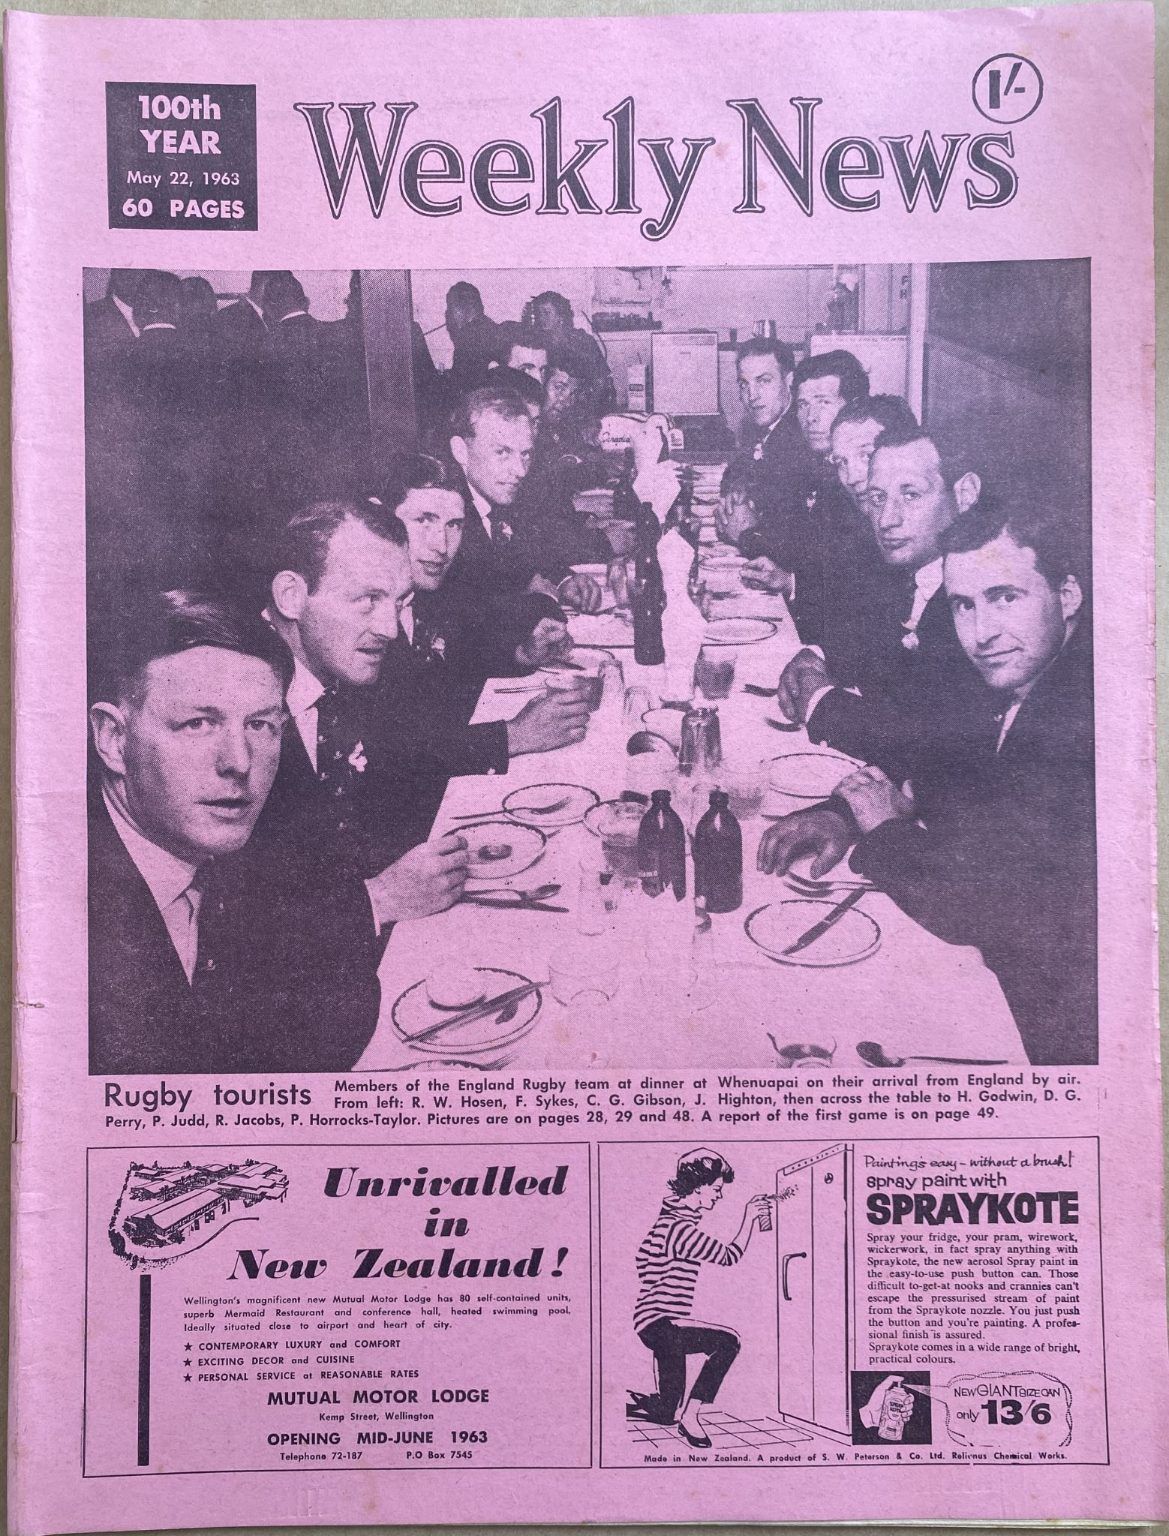 OLD NEWSPAPER: The Weekly News, No. 5191, 22 May 1963